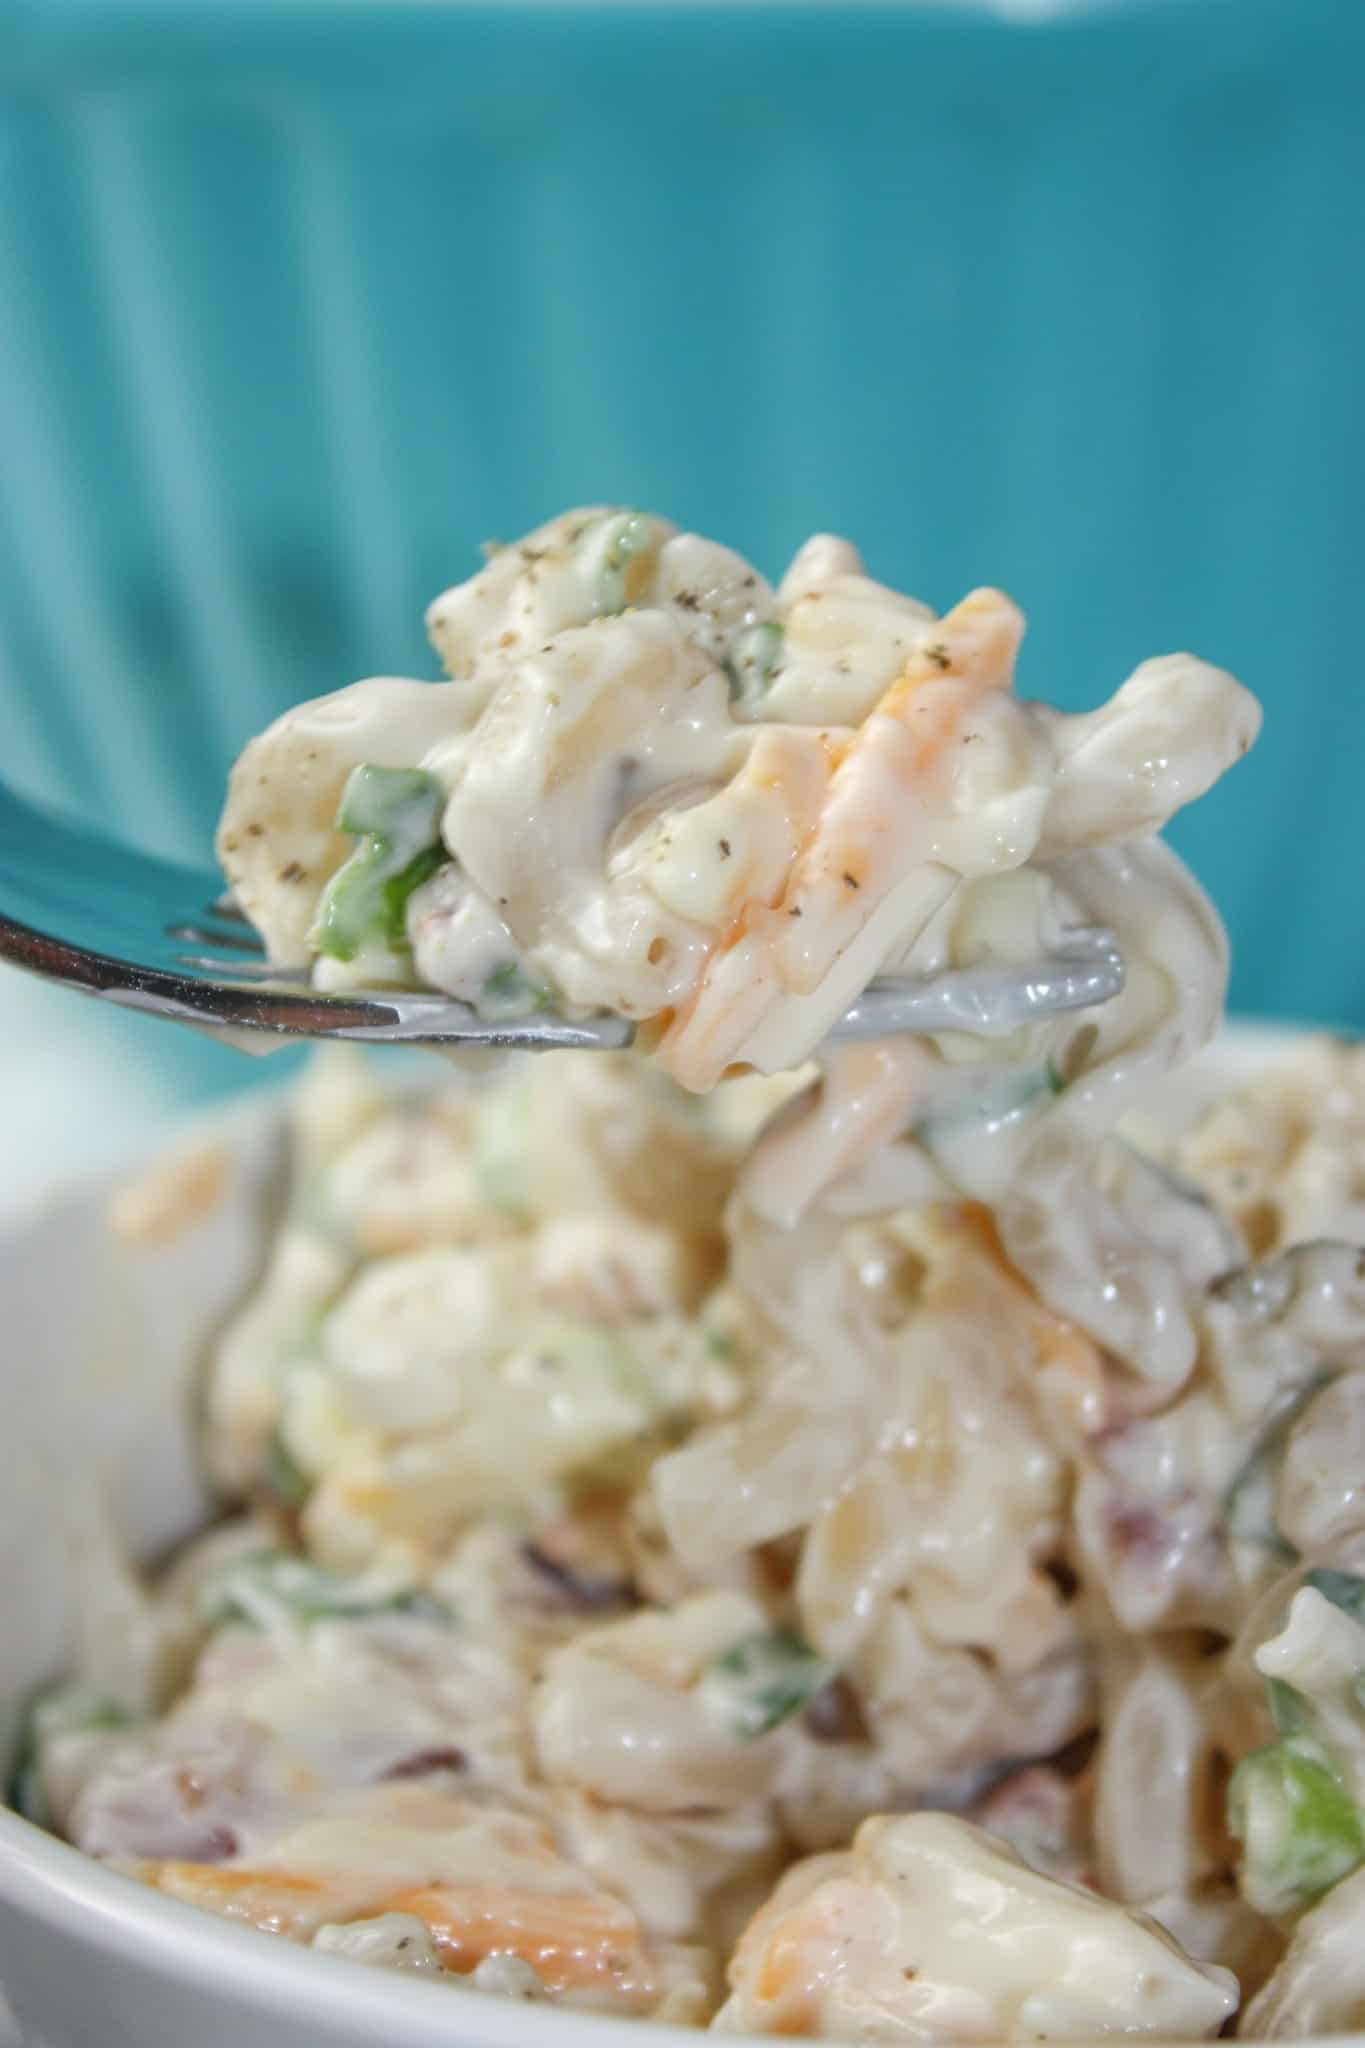 Million Dollar Pasta Salad takes a popular dip recipe and turns it into a delicious, gluten free pasta salad.  